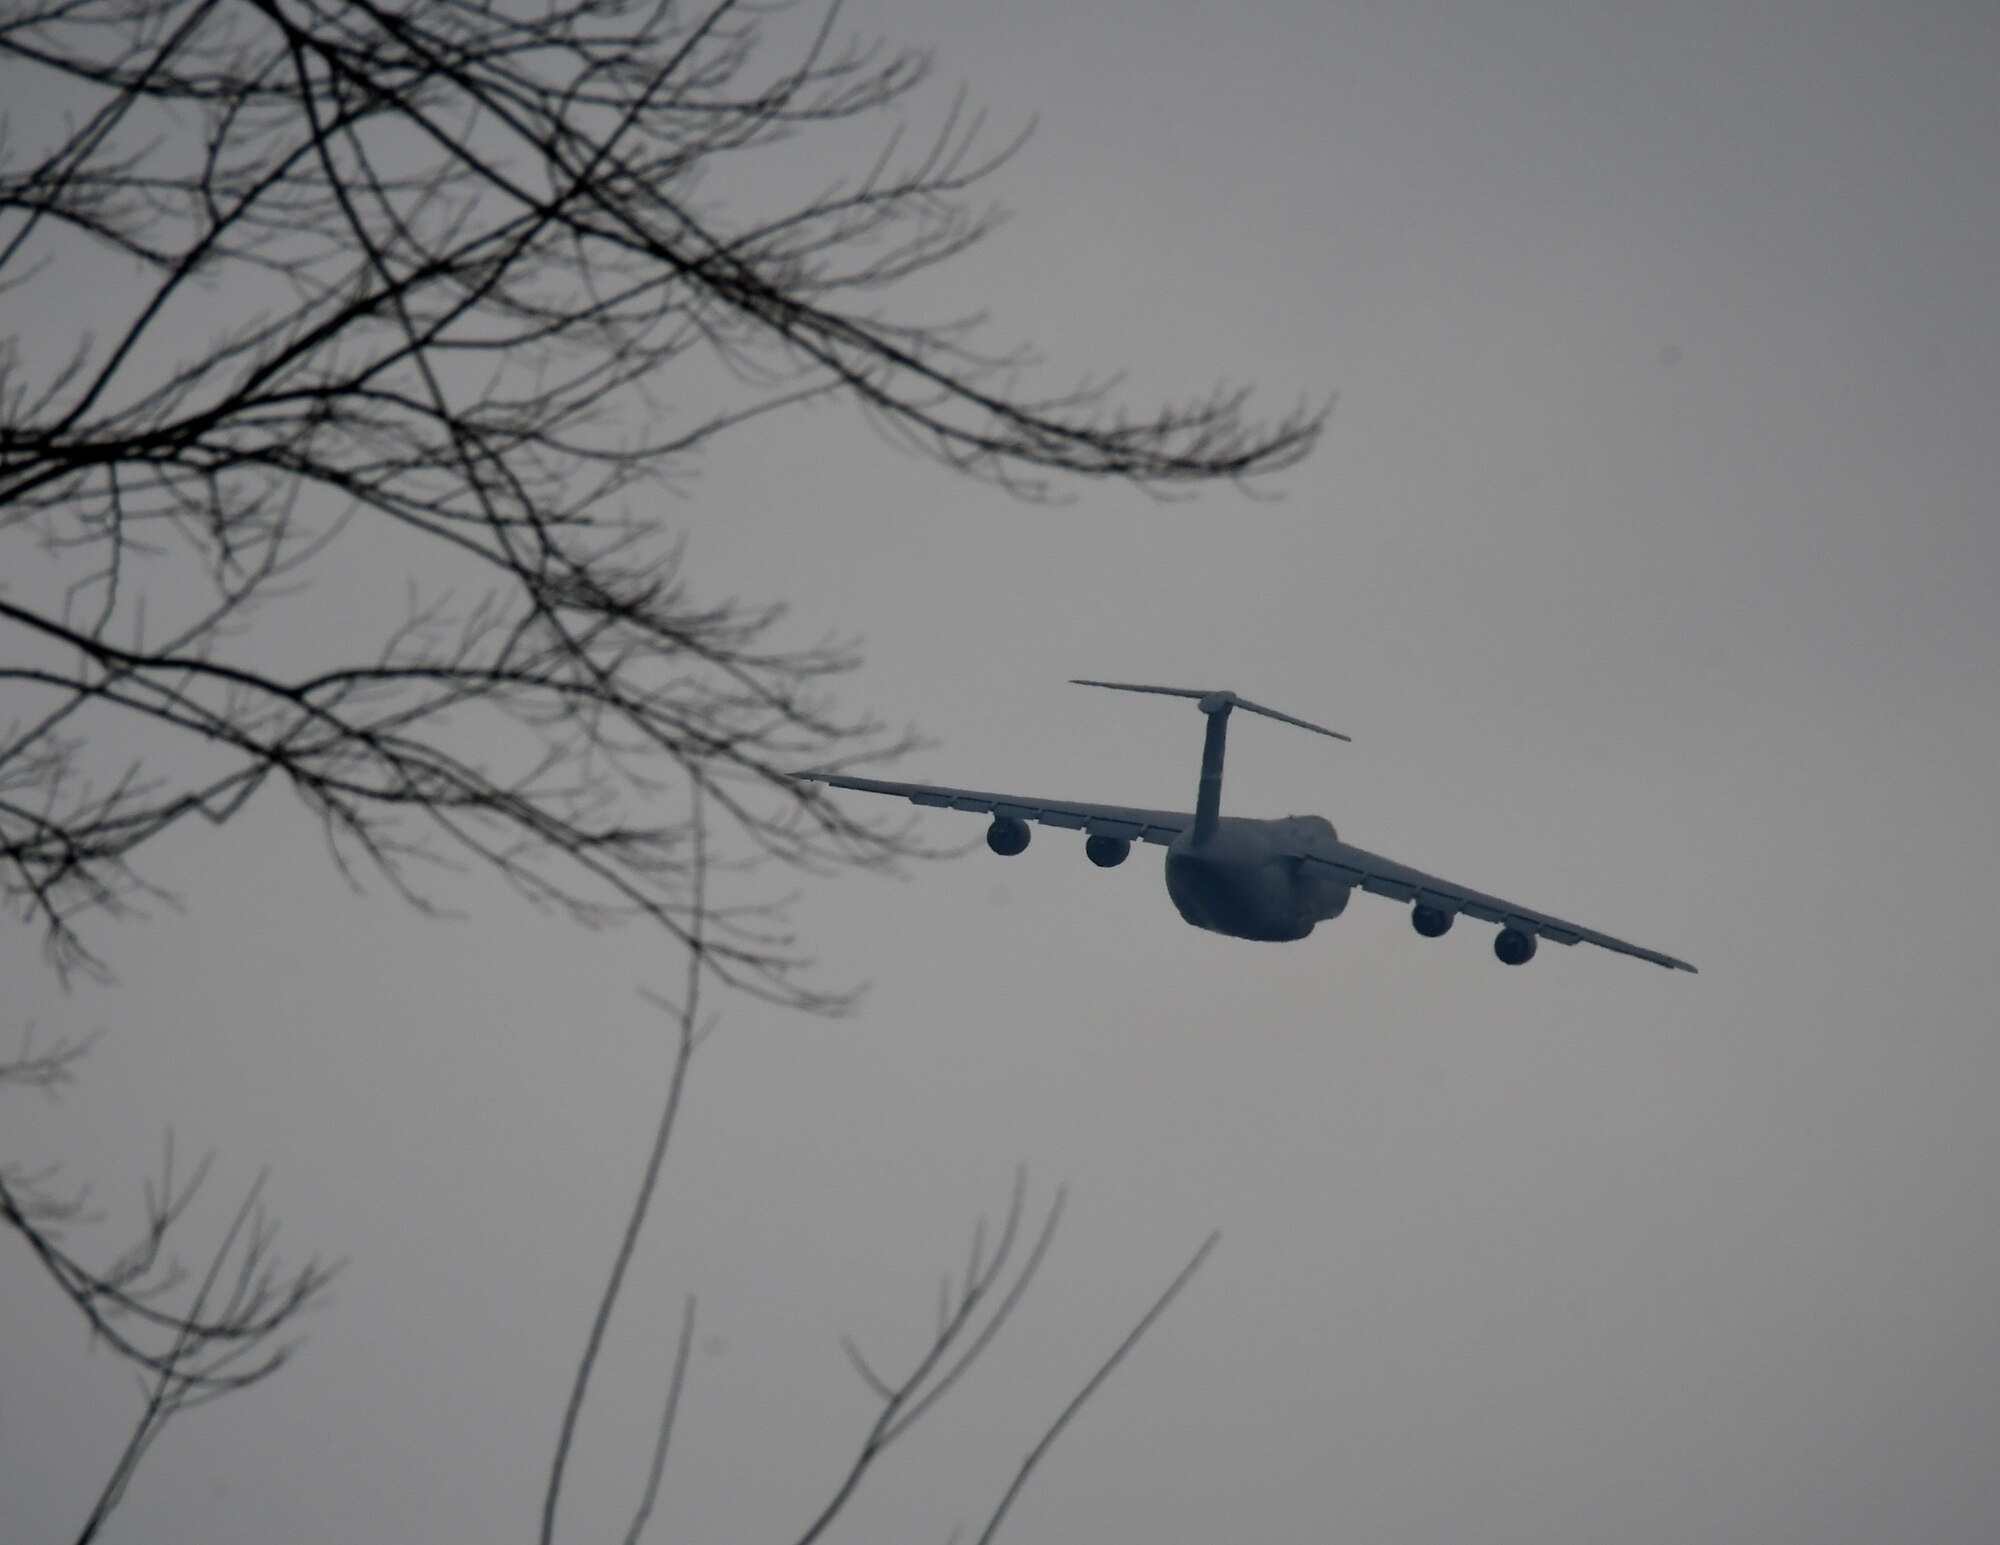 A C-5 aircraft makes a banking turn of approximately 15 degrees as it lifts off from training with the 932nd Airlift Wing March 2, 2019 at Scott Air Force Base, Illinois.  The 932nd Aeromedical Evacuation Squadron took part in a C-5M Super Galaxy patient evacuation training with the 142nd Aeromedical Evacuation Squadron, visiting from New Castle Air National Guard Base, Delaware, at Scott AFB, Illinois, March 2.

The training consisted of setting up litters on the back of seats and in the cargo hold. Only three AES’s have been certified in the C-5 patient evacuation training. C-5 training prepares units who are uncertified to do aeromedical evacuations and to be one step closer to completing the training. 

“Our prime aircrafts are C-130, KC-135 and C-17,” said Senior Master Sgt. Tonya Hupp, 932nd AES Operations Superintendent. “The C-5 is our opportune aircraft that we can move patients in the event that we are needed, if there were a mass casualty.”  (U.S. Air Force photo by Lt. Col. Stan Paregien)